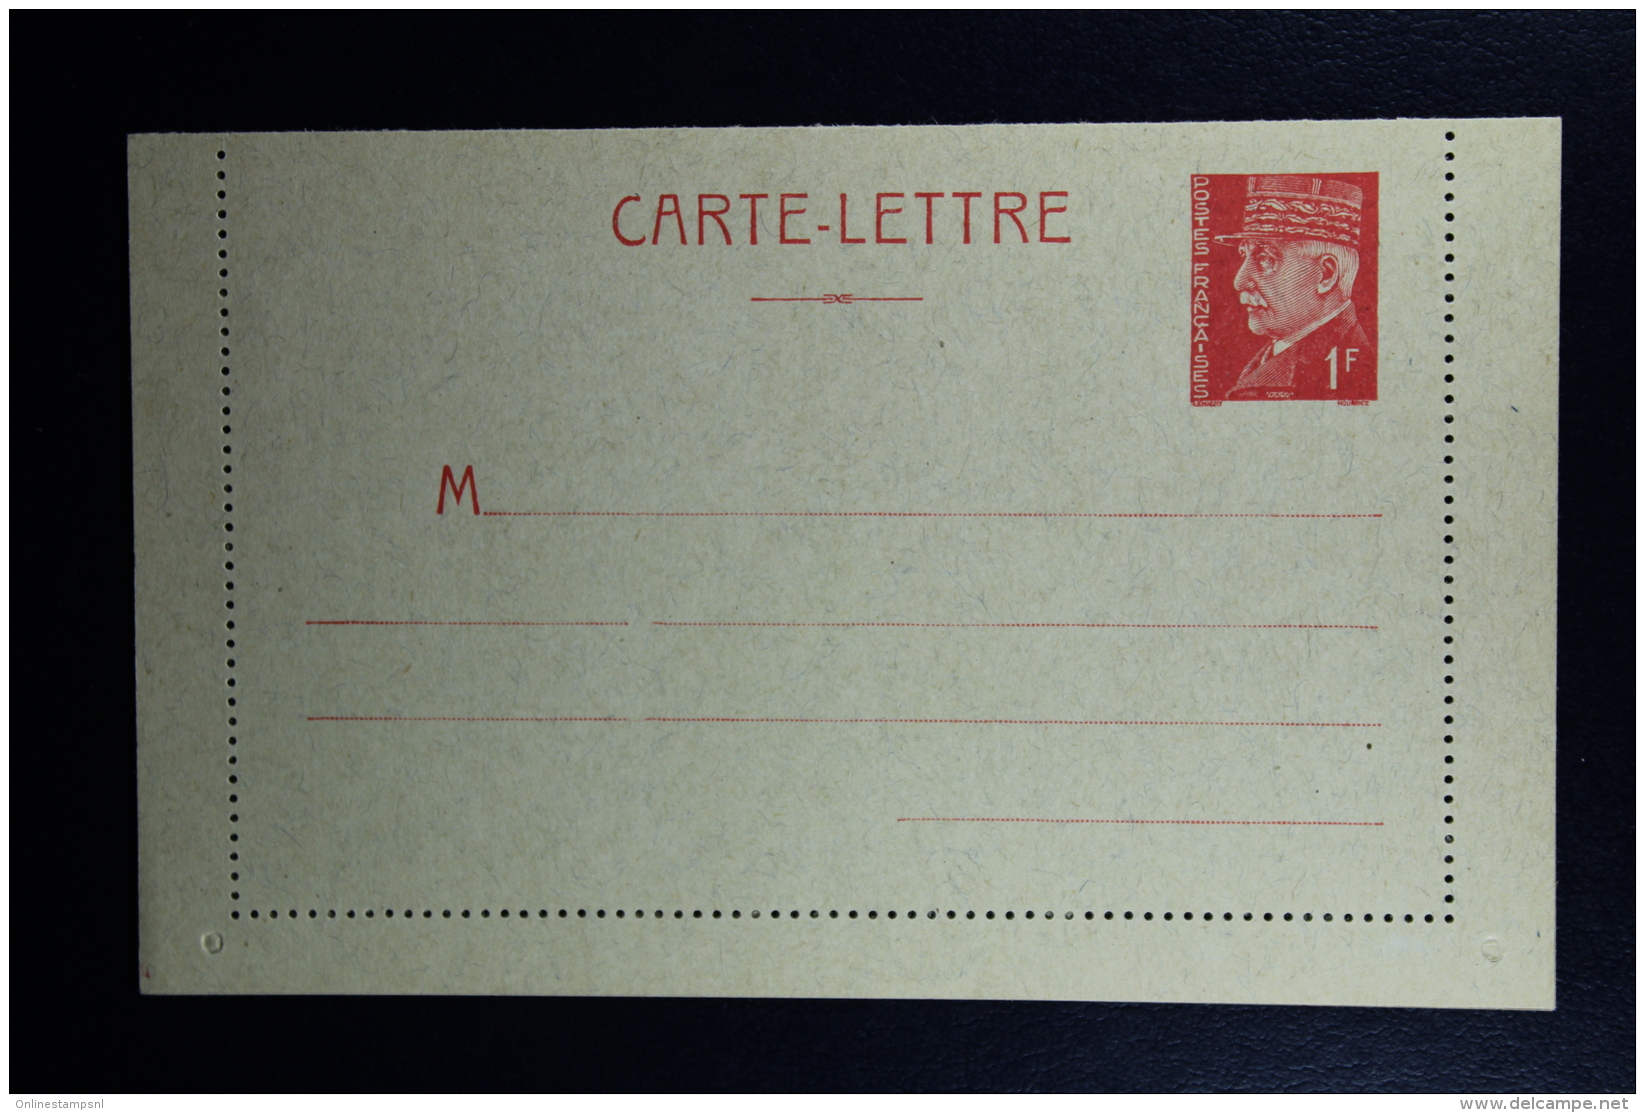 France: Carte-Lettre  Petain 1F  Type C1  Not Used - Letter Cards